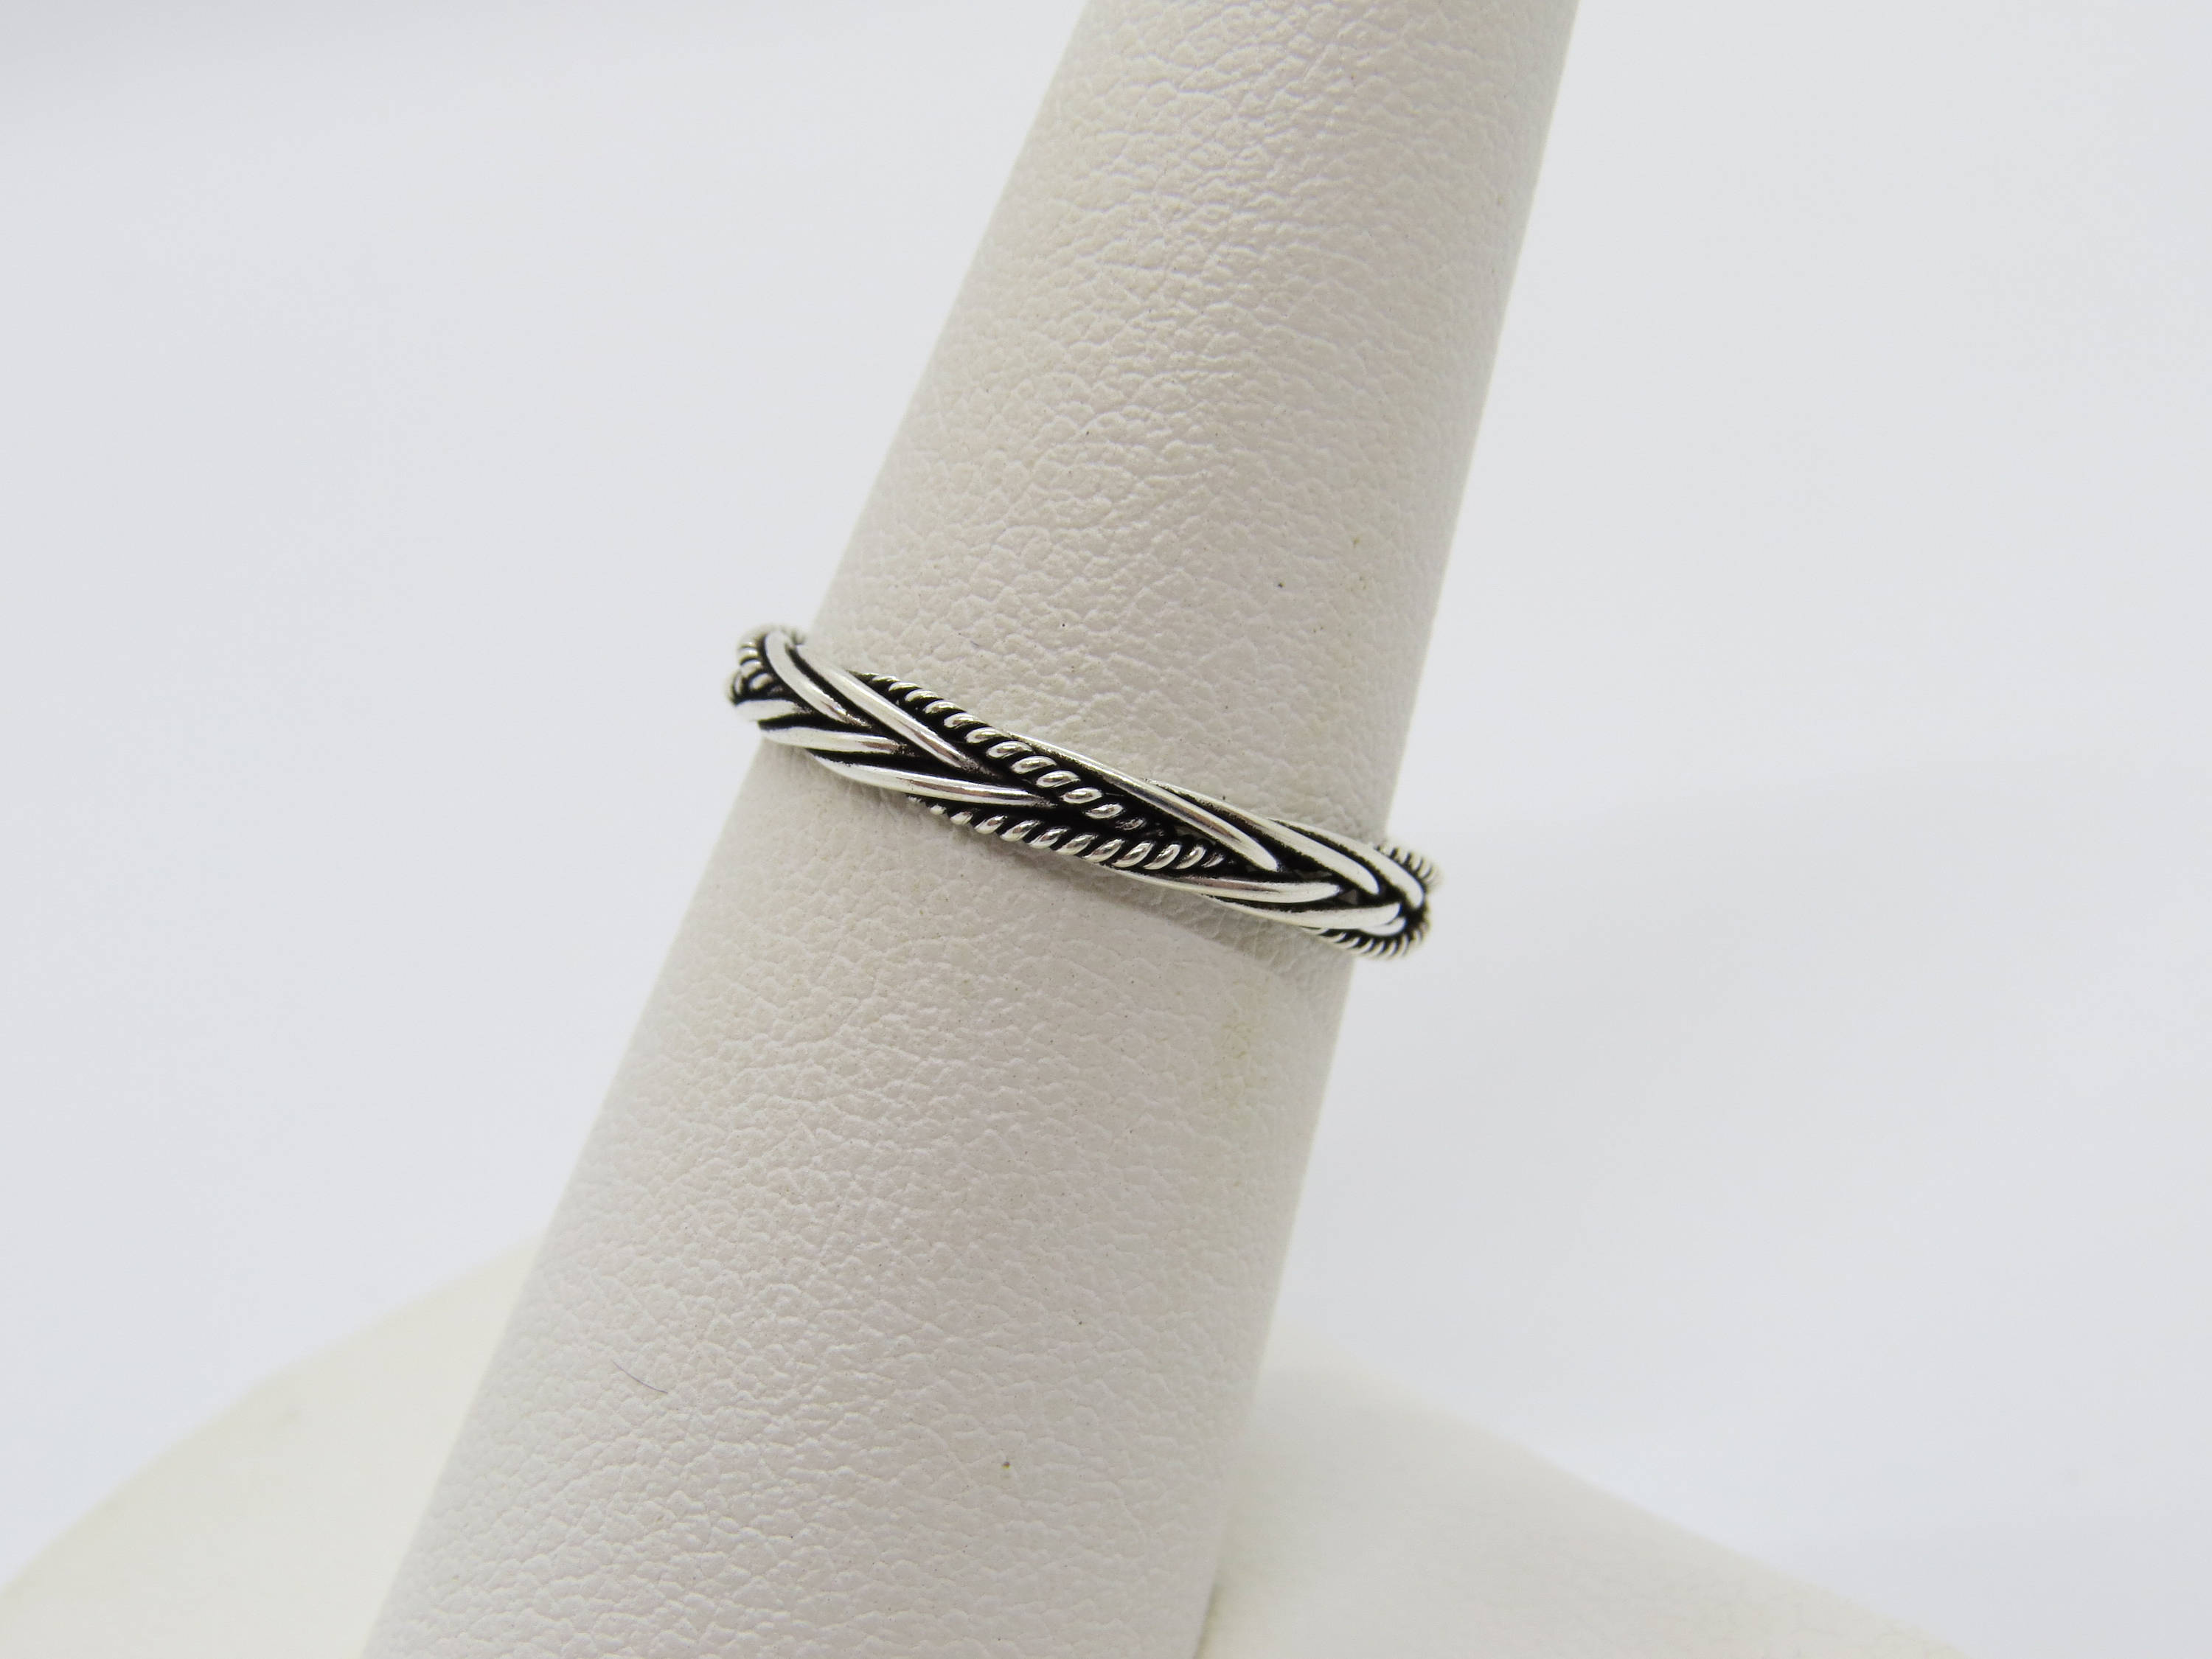 Vintage Sterling Silver Twisted Rope Band Ring Size 7 - Etsy